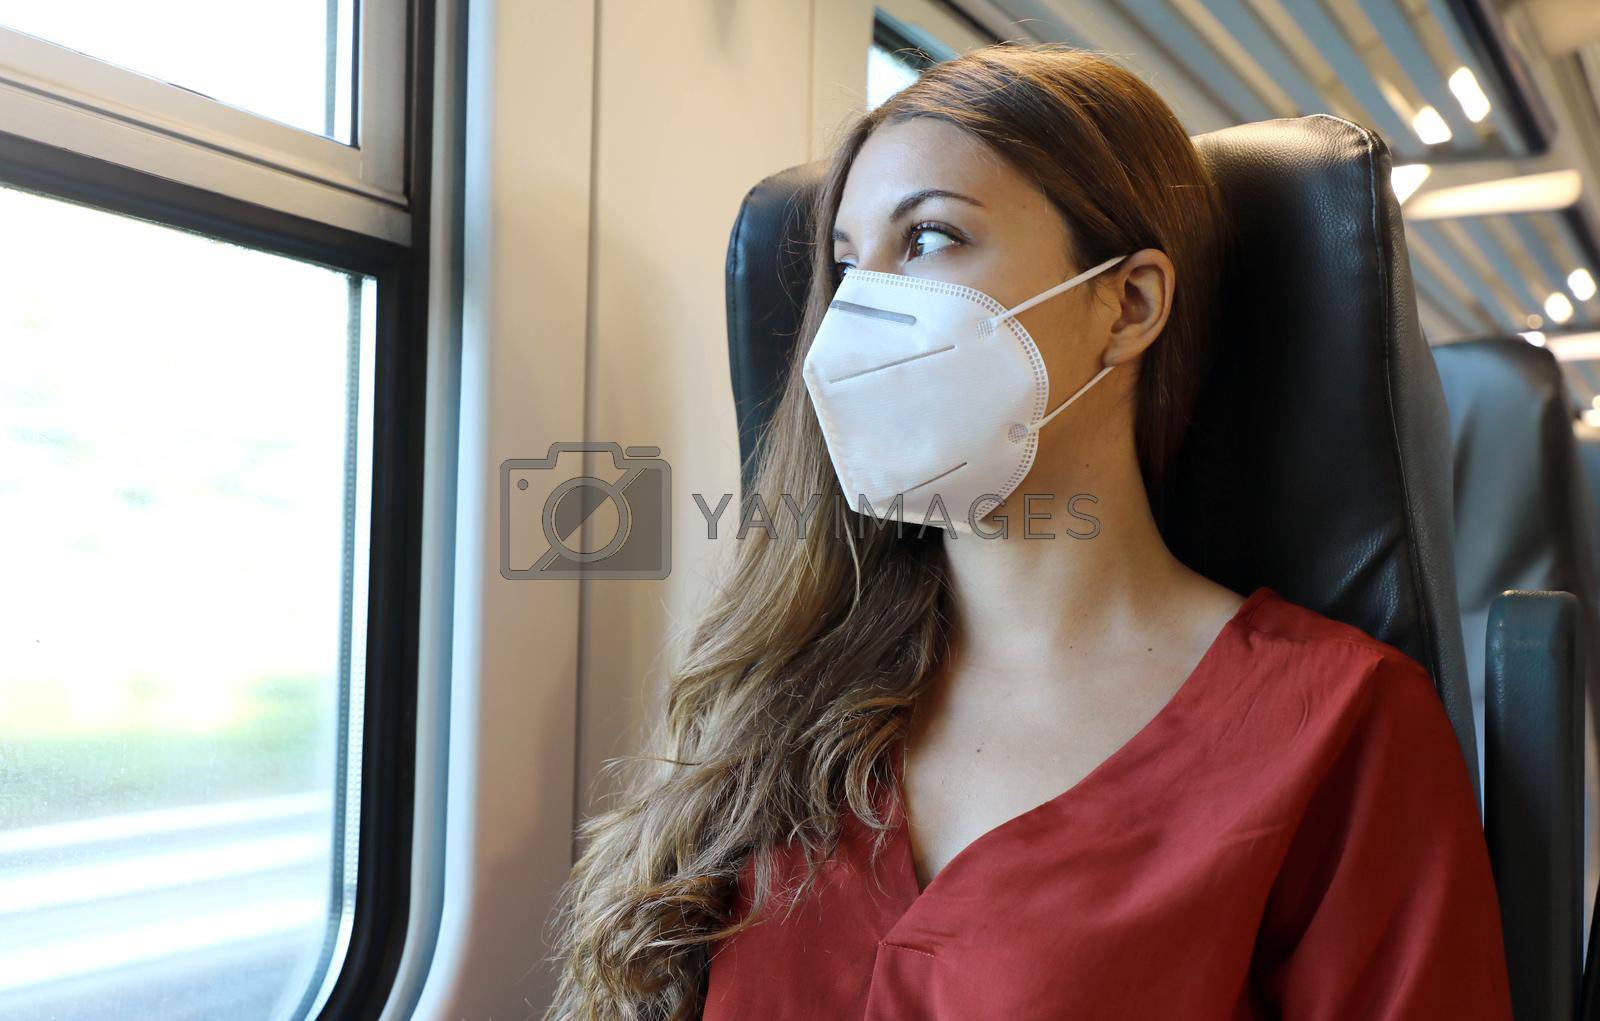 Travel safely on public transport. Young woman with face mask looking through train window. Train passenger with protective mask traveling early morning to go to work.